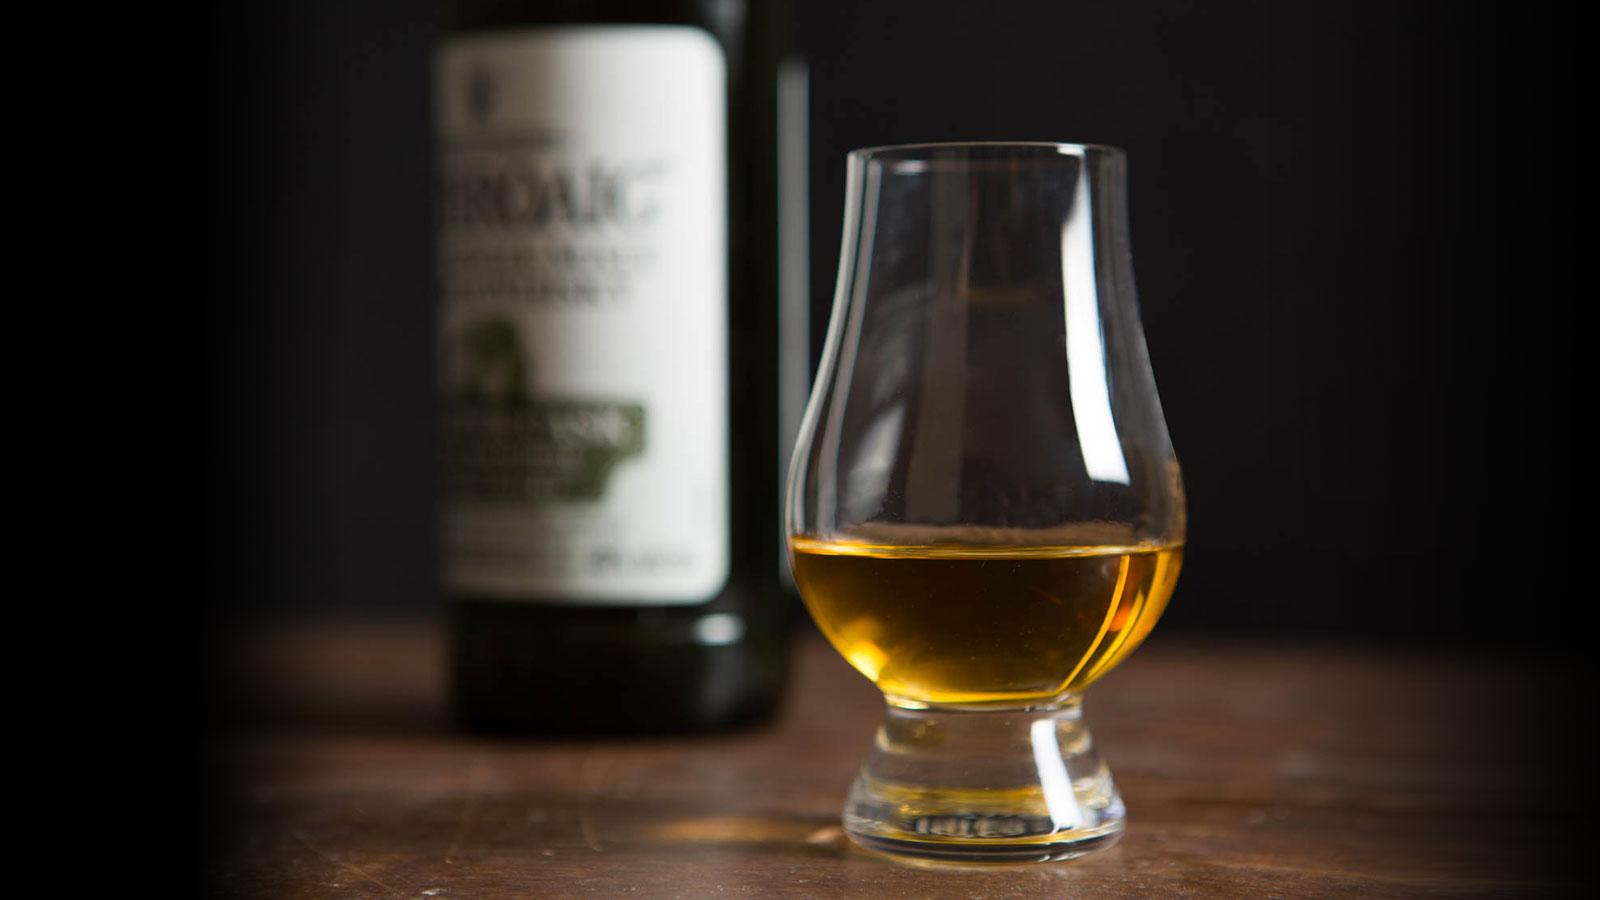 Where to buy | Best Whiskies For The Money – by Daniel and Rex from the Whisk(e)y Vault